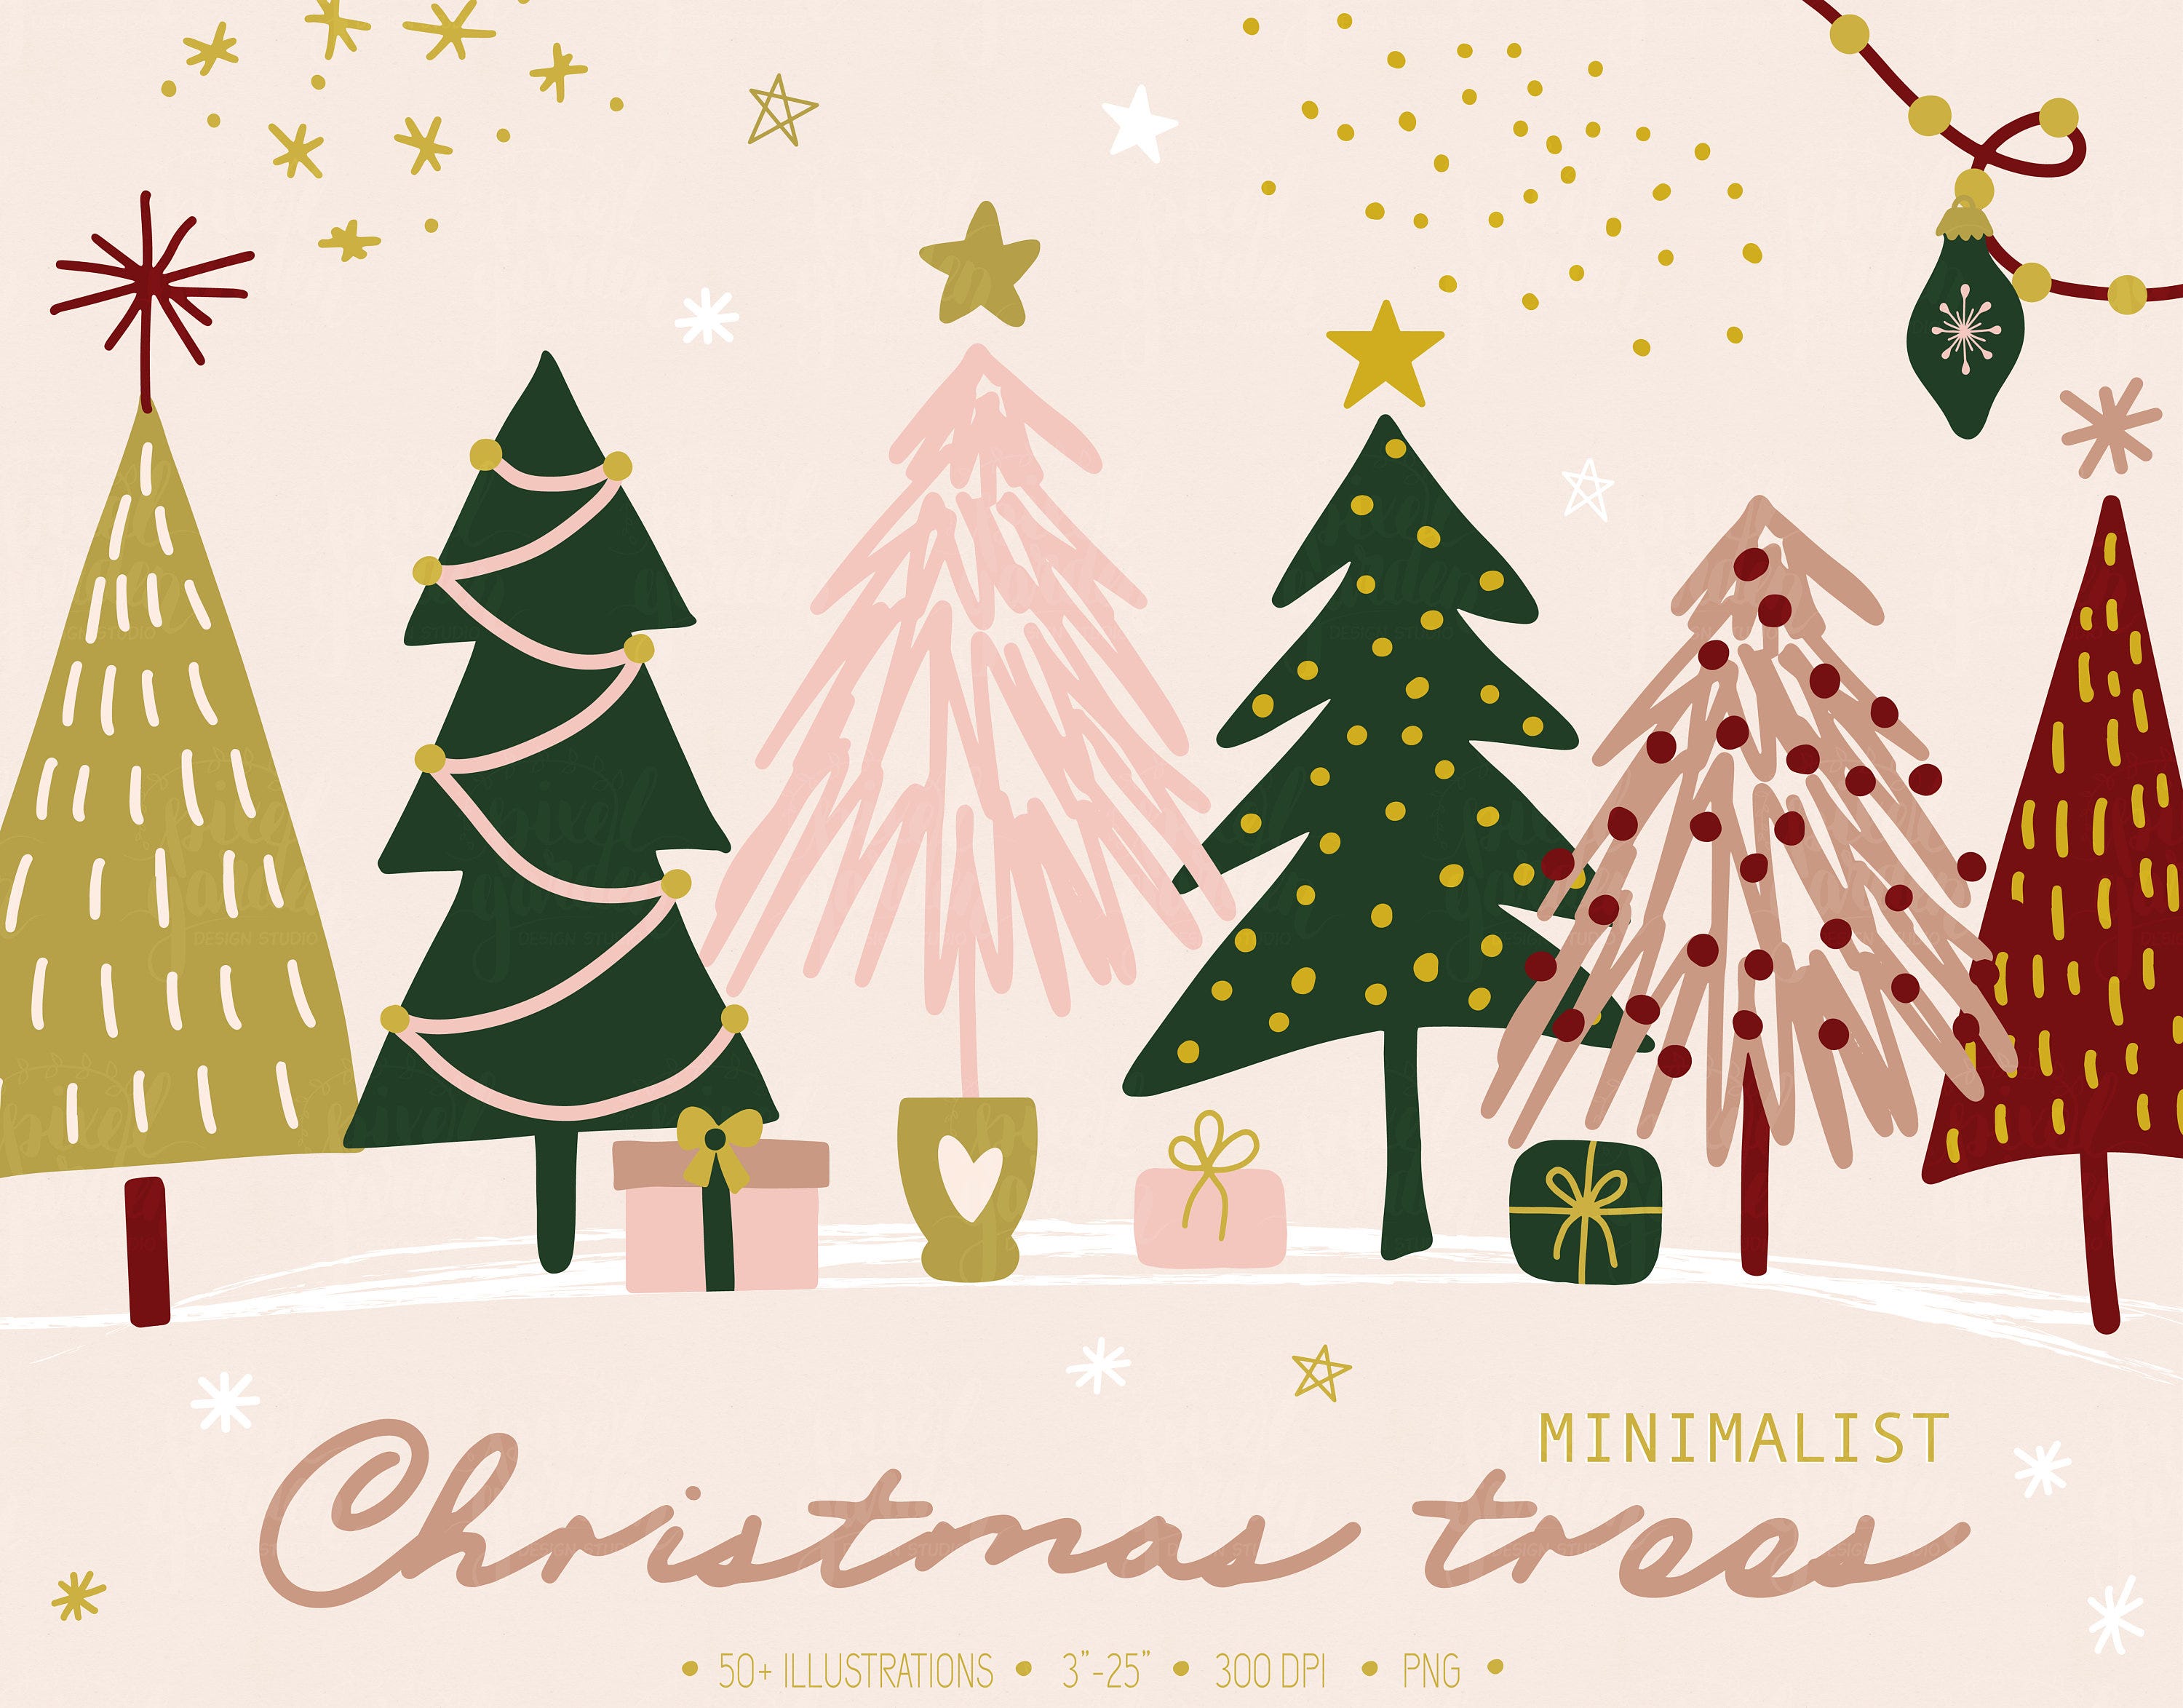 Christmas Tree Clipart. Hand Drawn Minimalist Illustrations. Winter Fir Tree Doodles. Christmas Tree Gift Tags, Cards in Gold, Pink, Silver.